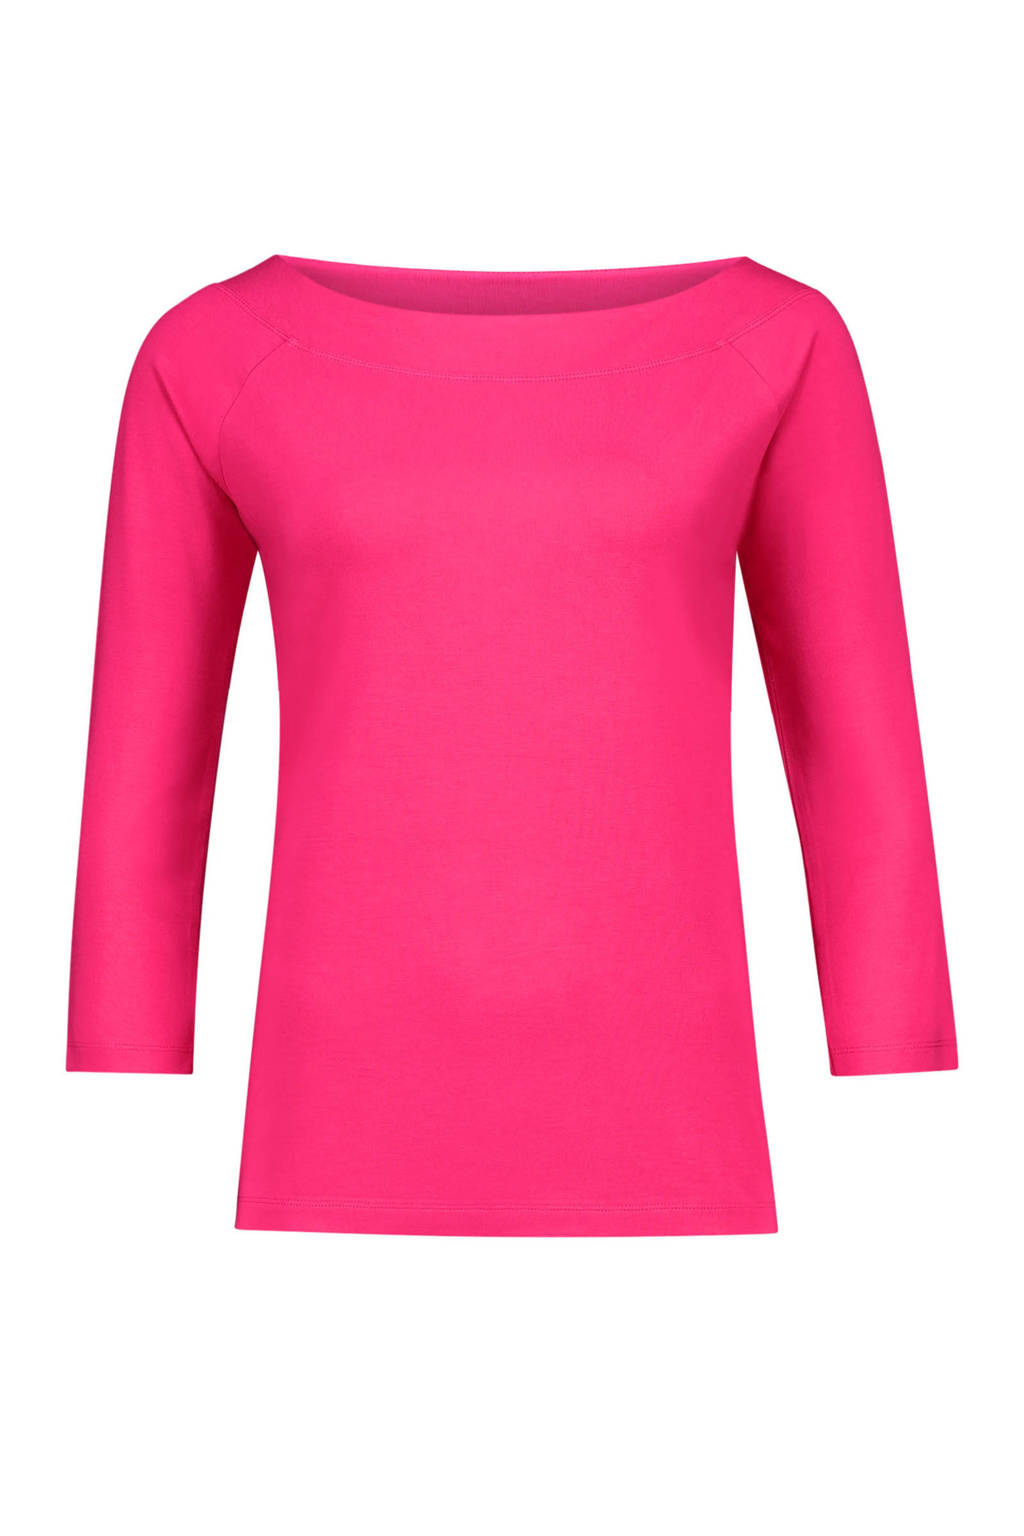 Claudia Sträter jersey boothals top 3/4 mouw fuchsia